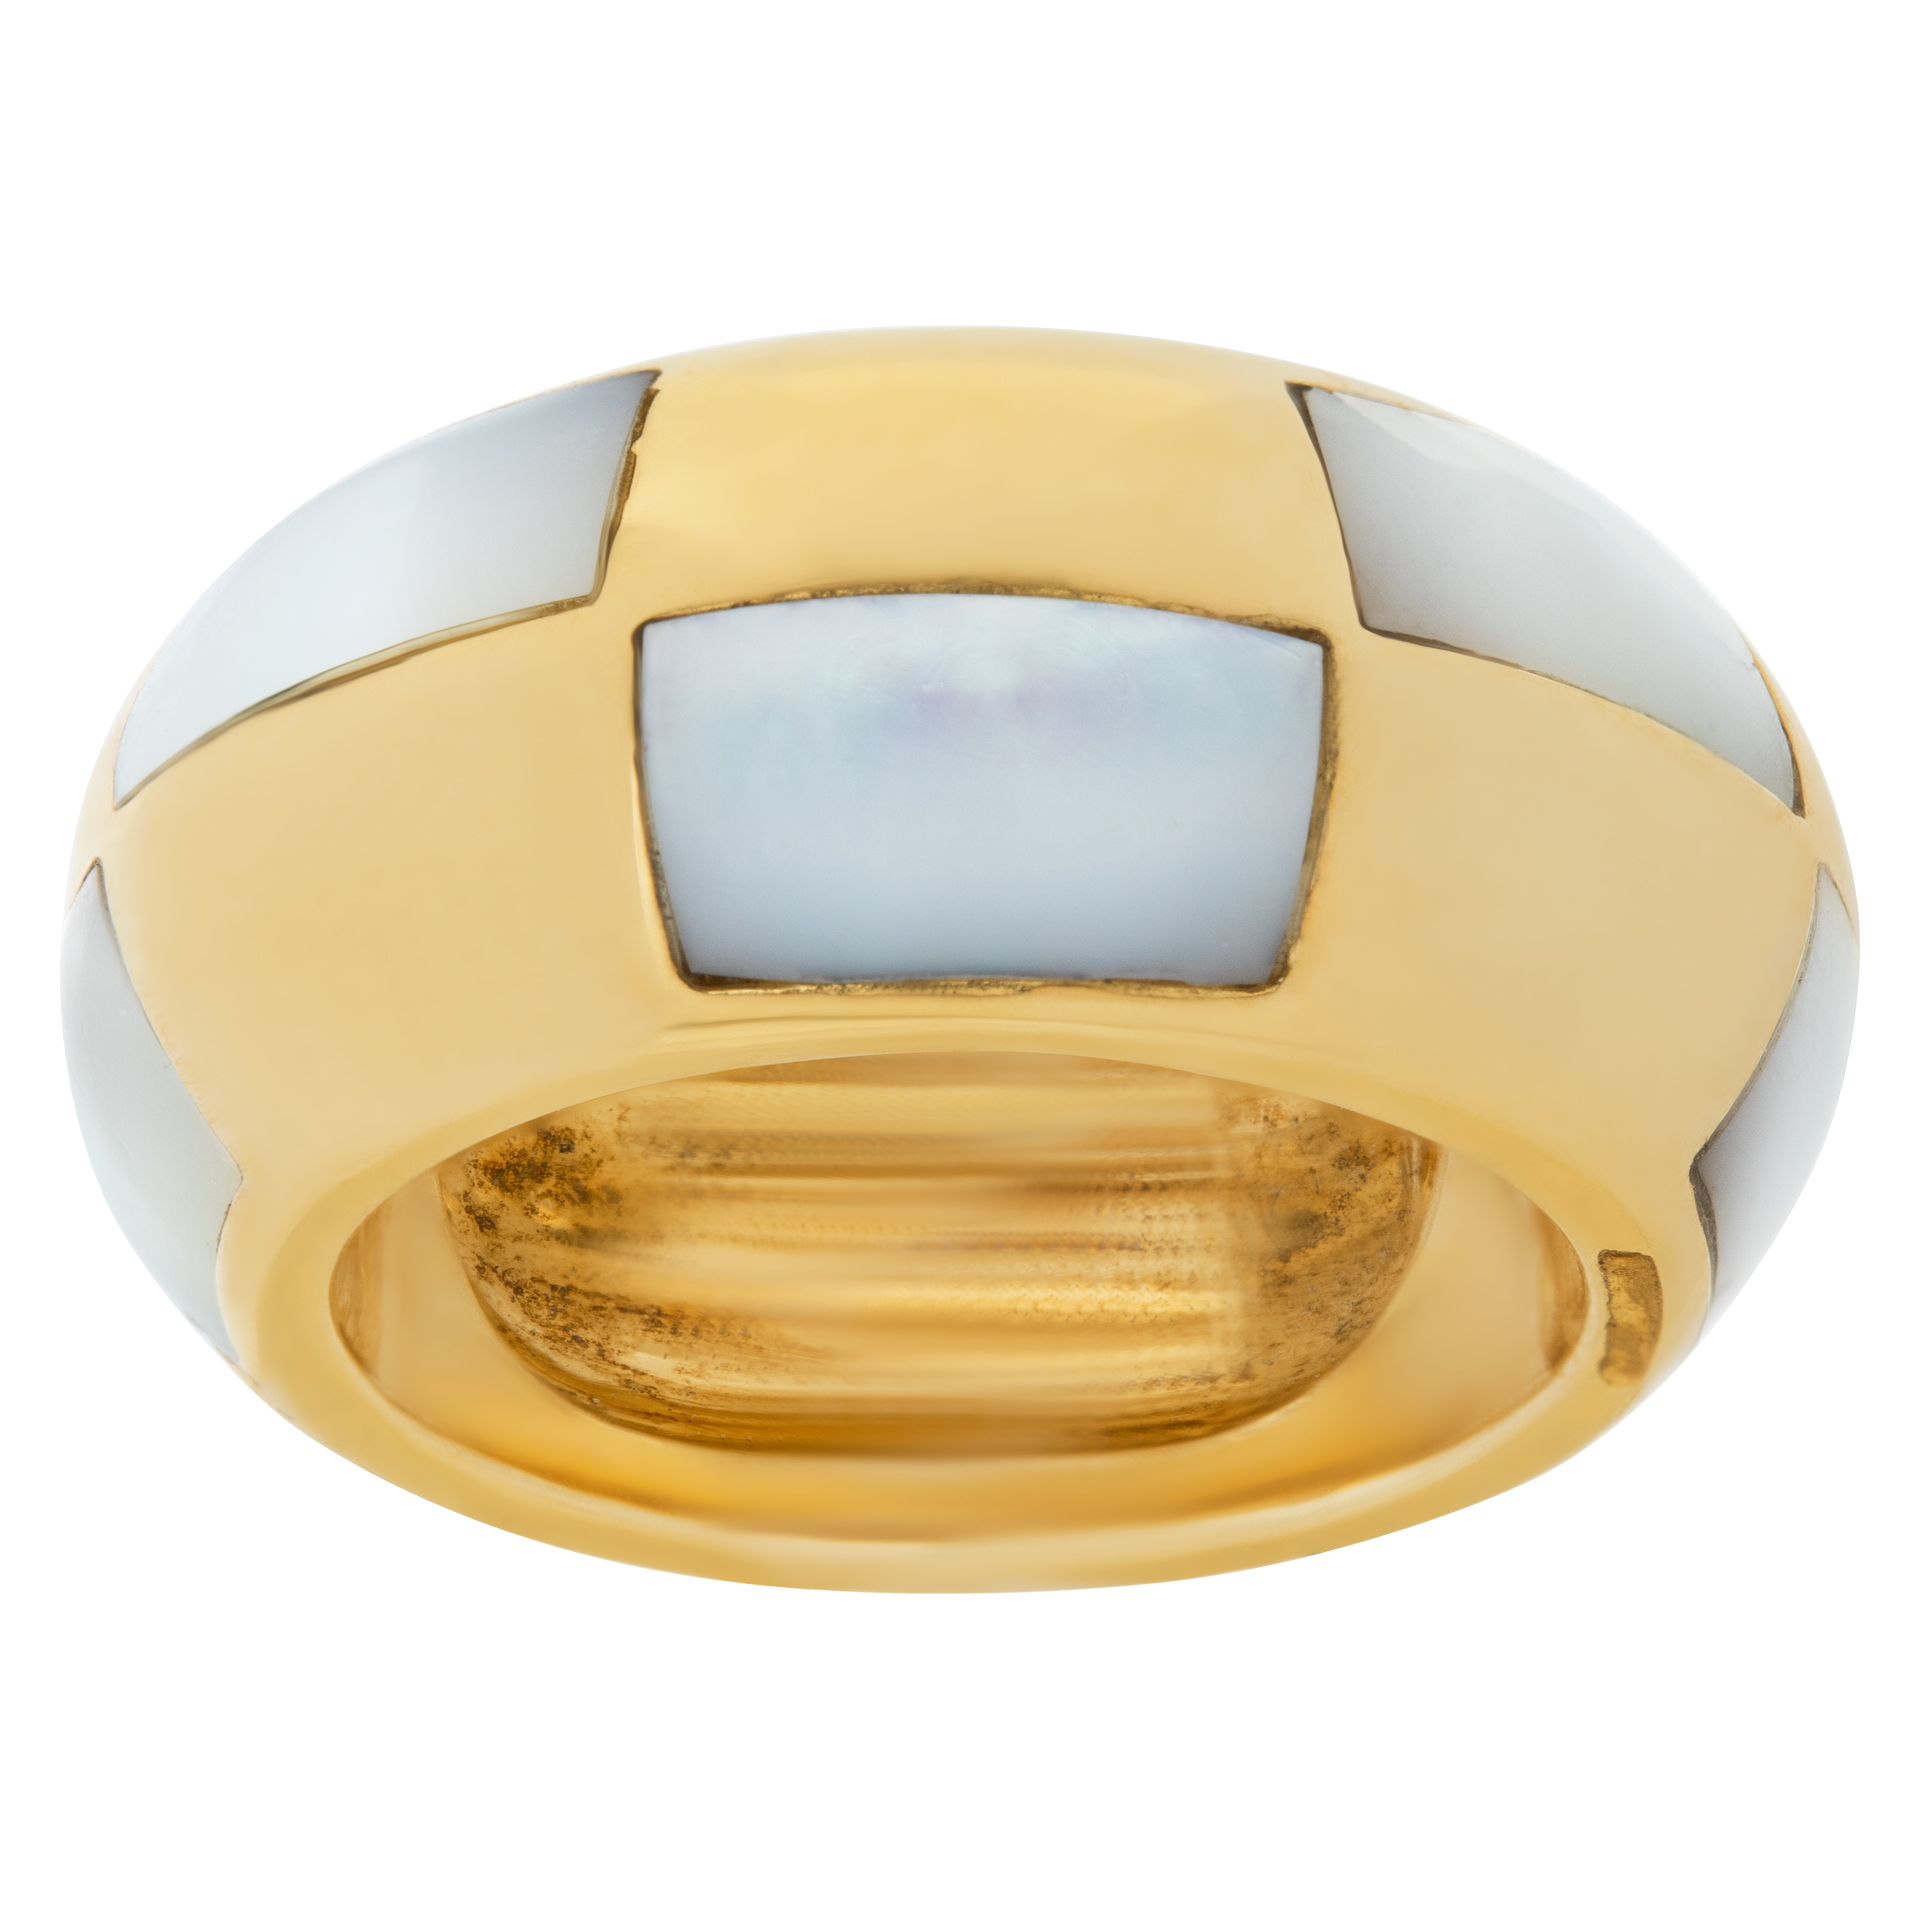 Mauboussin ring in 18k yellow gold with inlaid mother of pearl accents